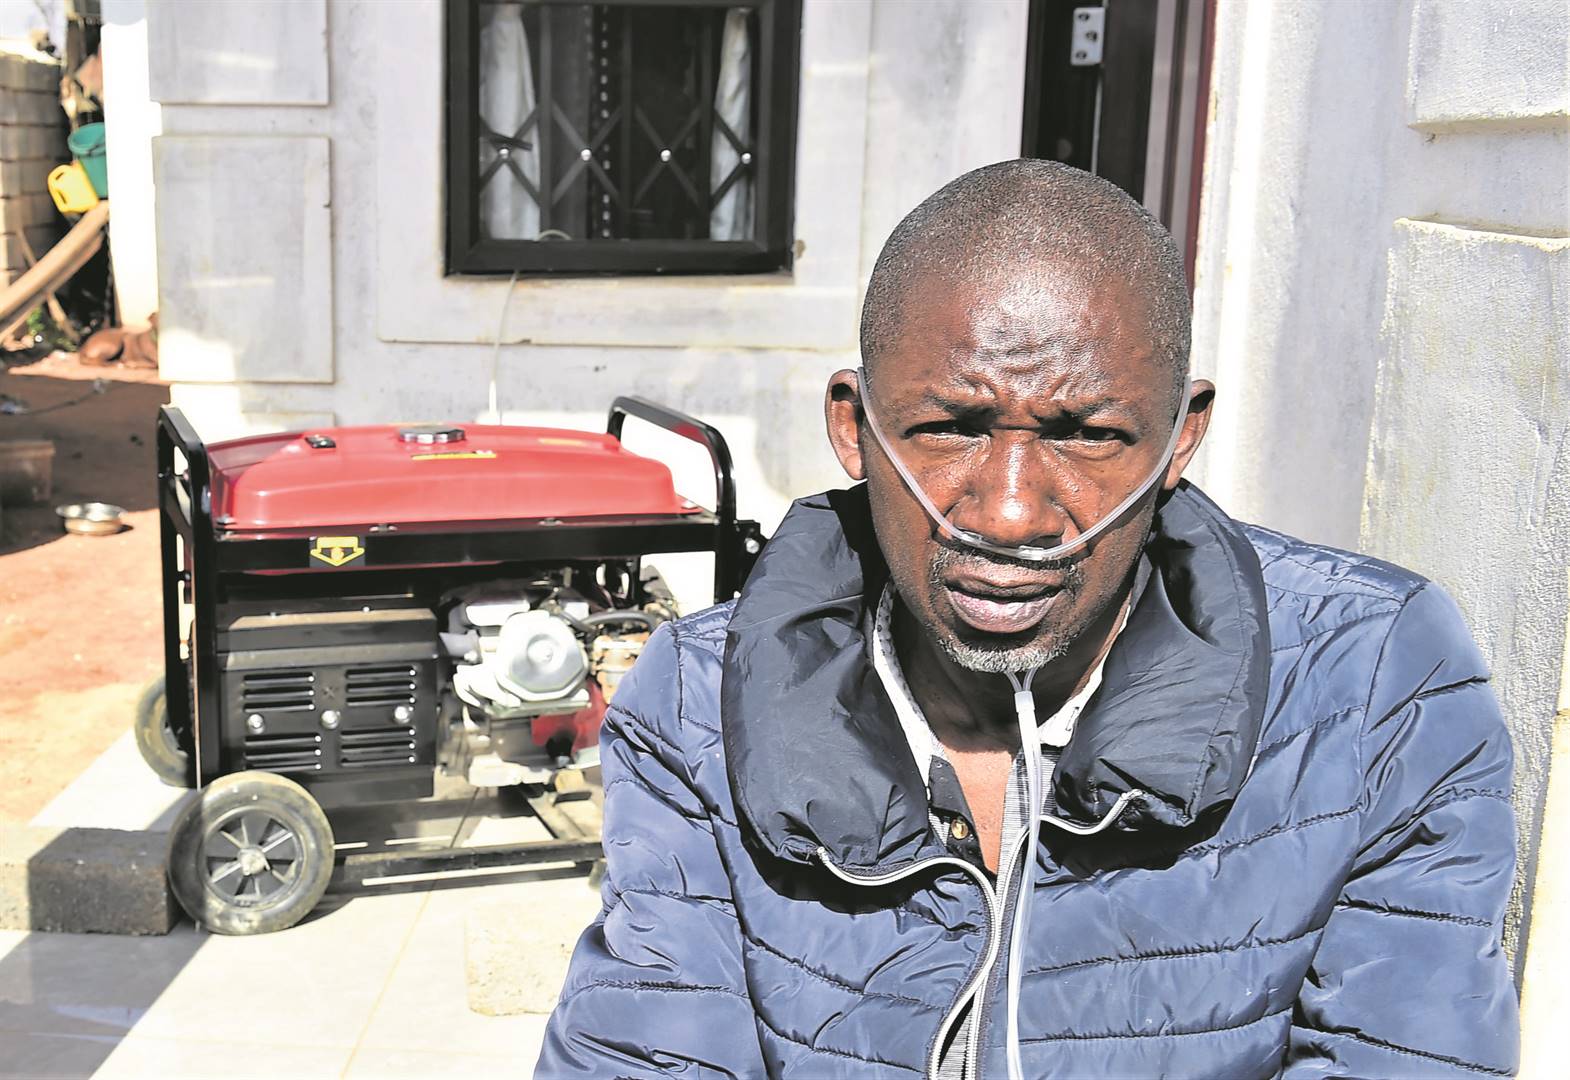 David Mhlongo believes load-shedding will kill him as his health depends on an oxygen machine that needs electricity to work. Photo by Morapedi Mashashe